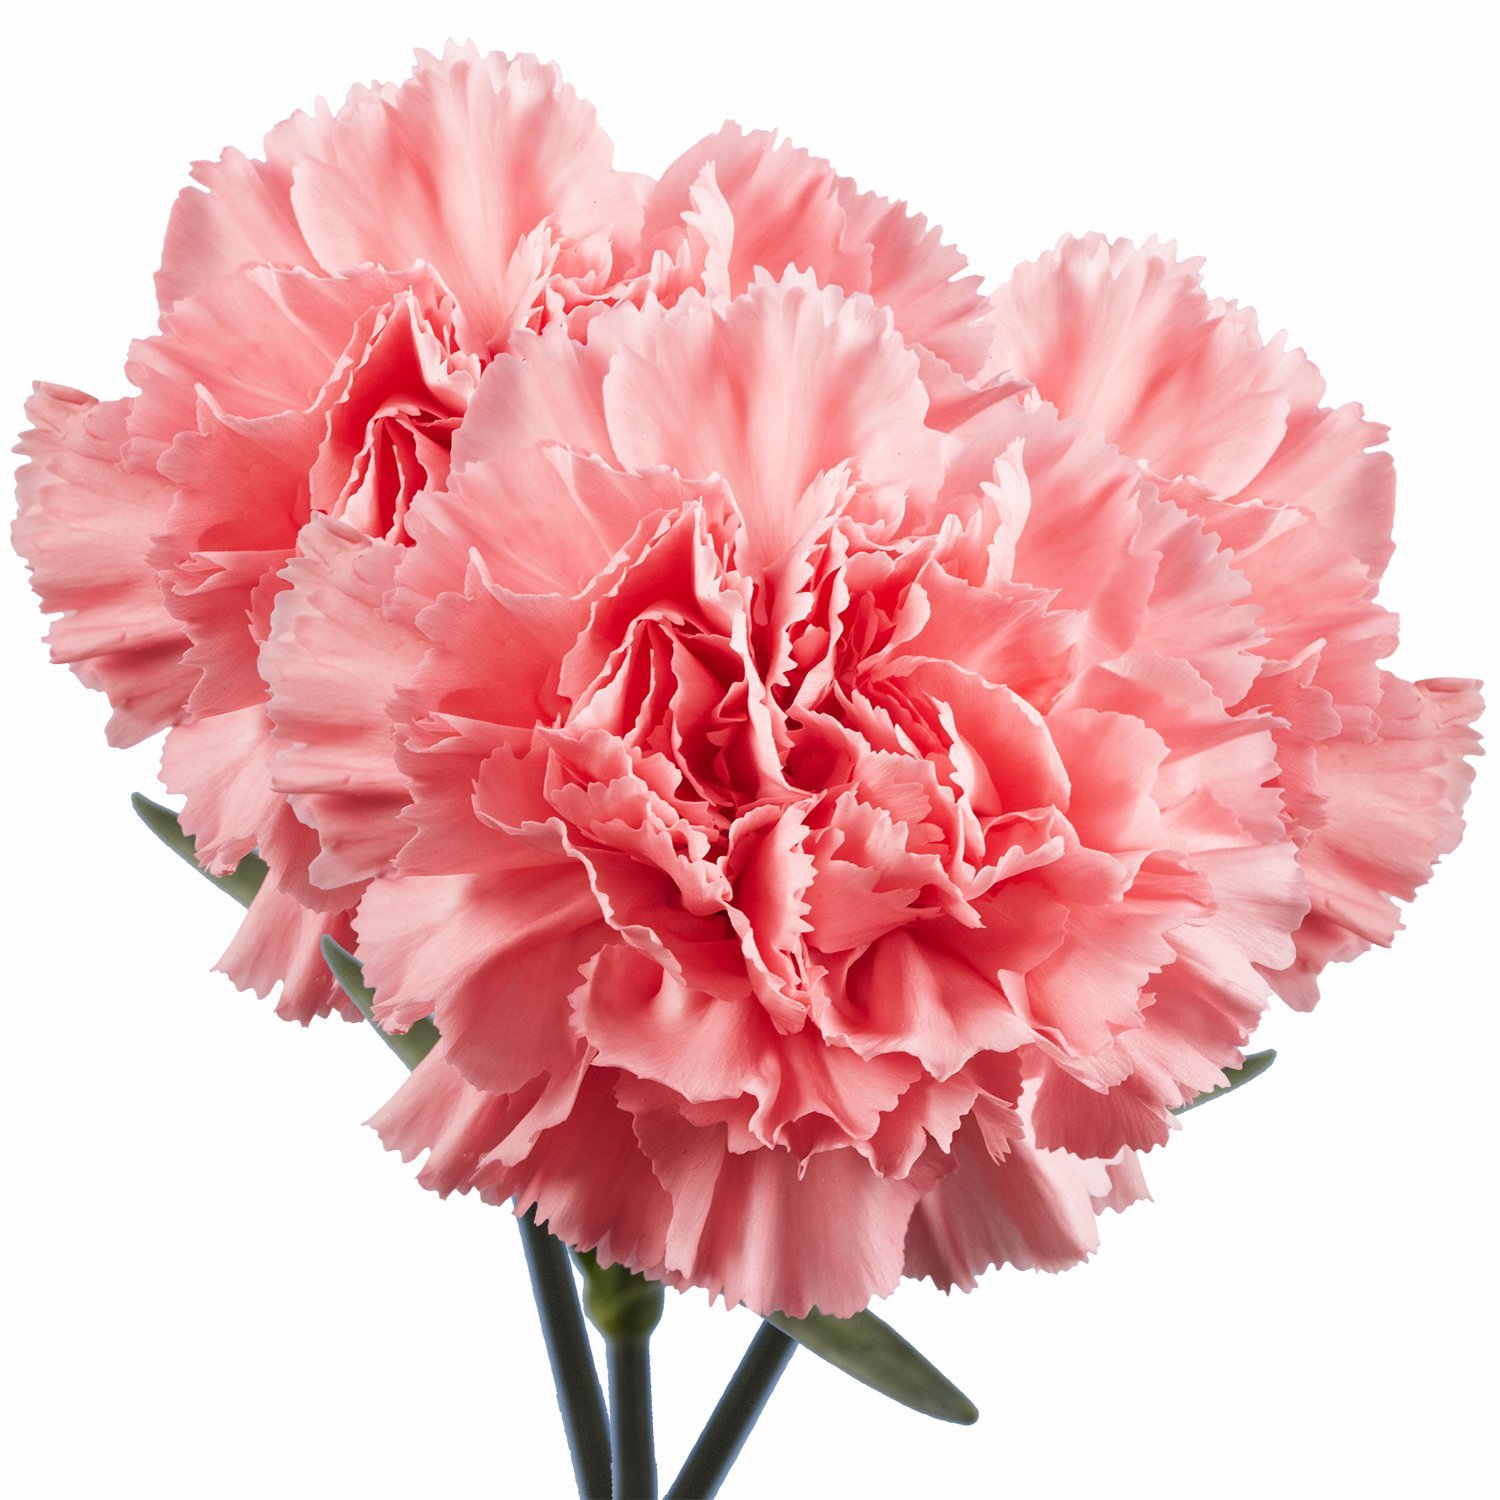 Amazon.com : GlobalRose 100 Mother´s Day Pink Carnations - Fresh ...